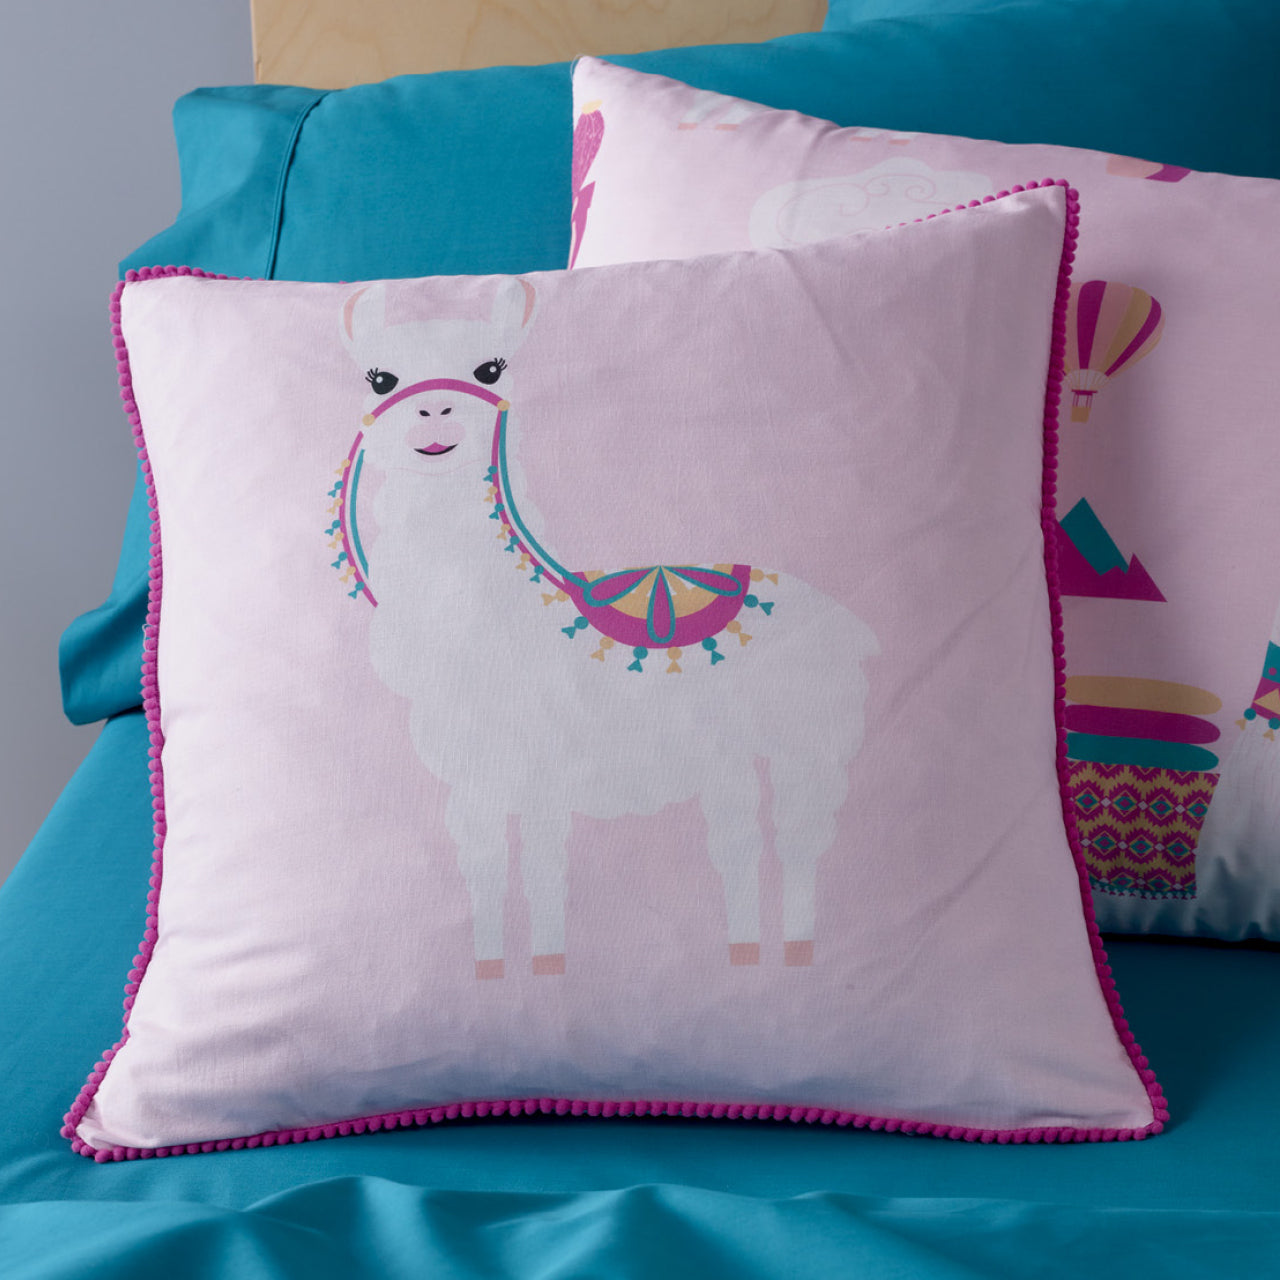 Ashlee Cushion cover on bed